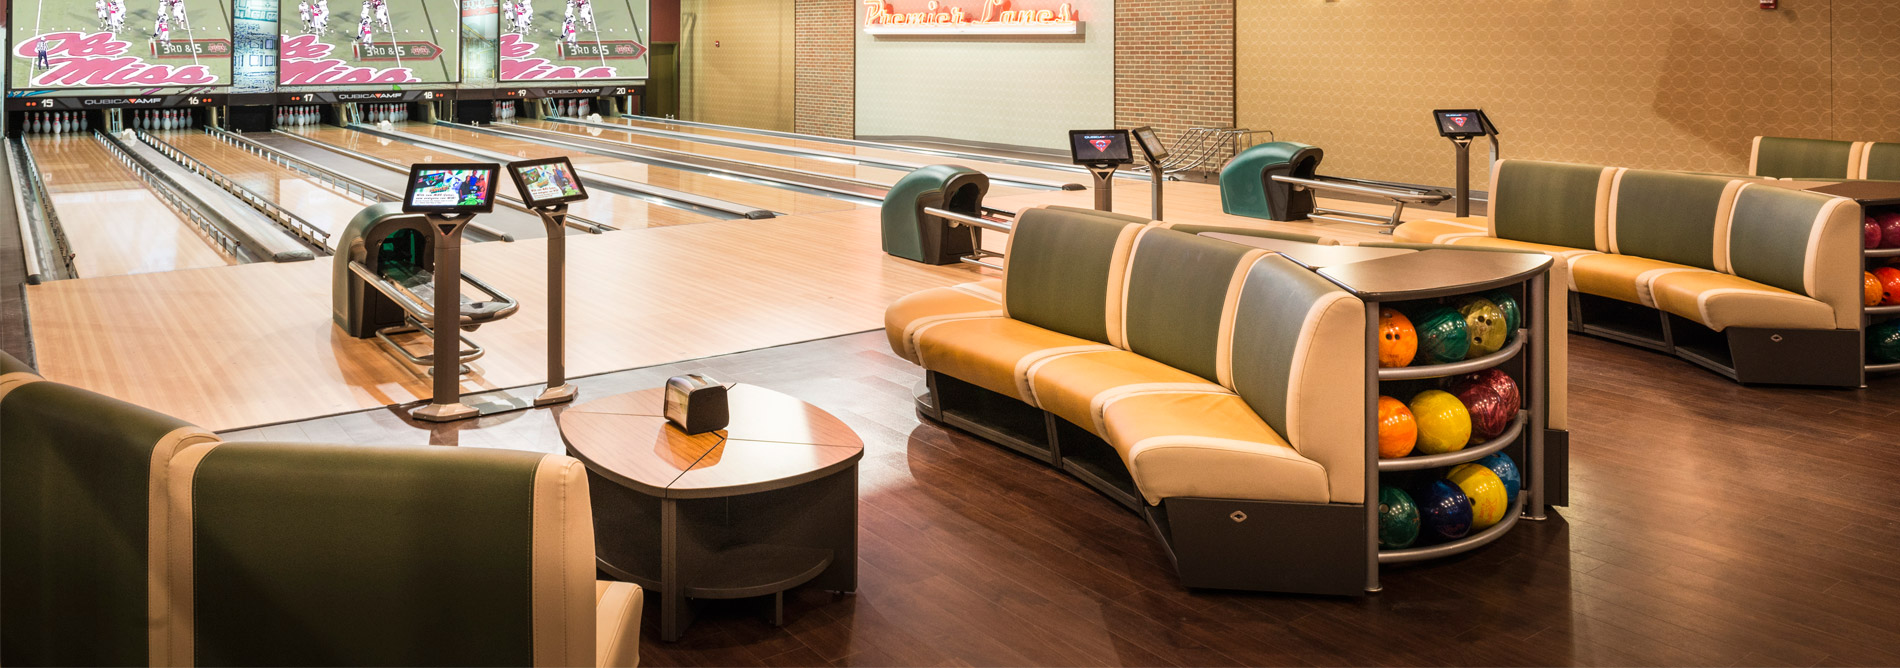 Bowling-QubicaAMF-furniture-Harmony-banner.jpg